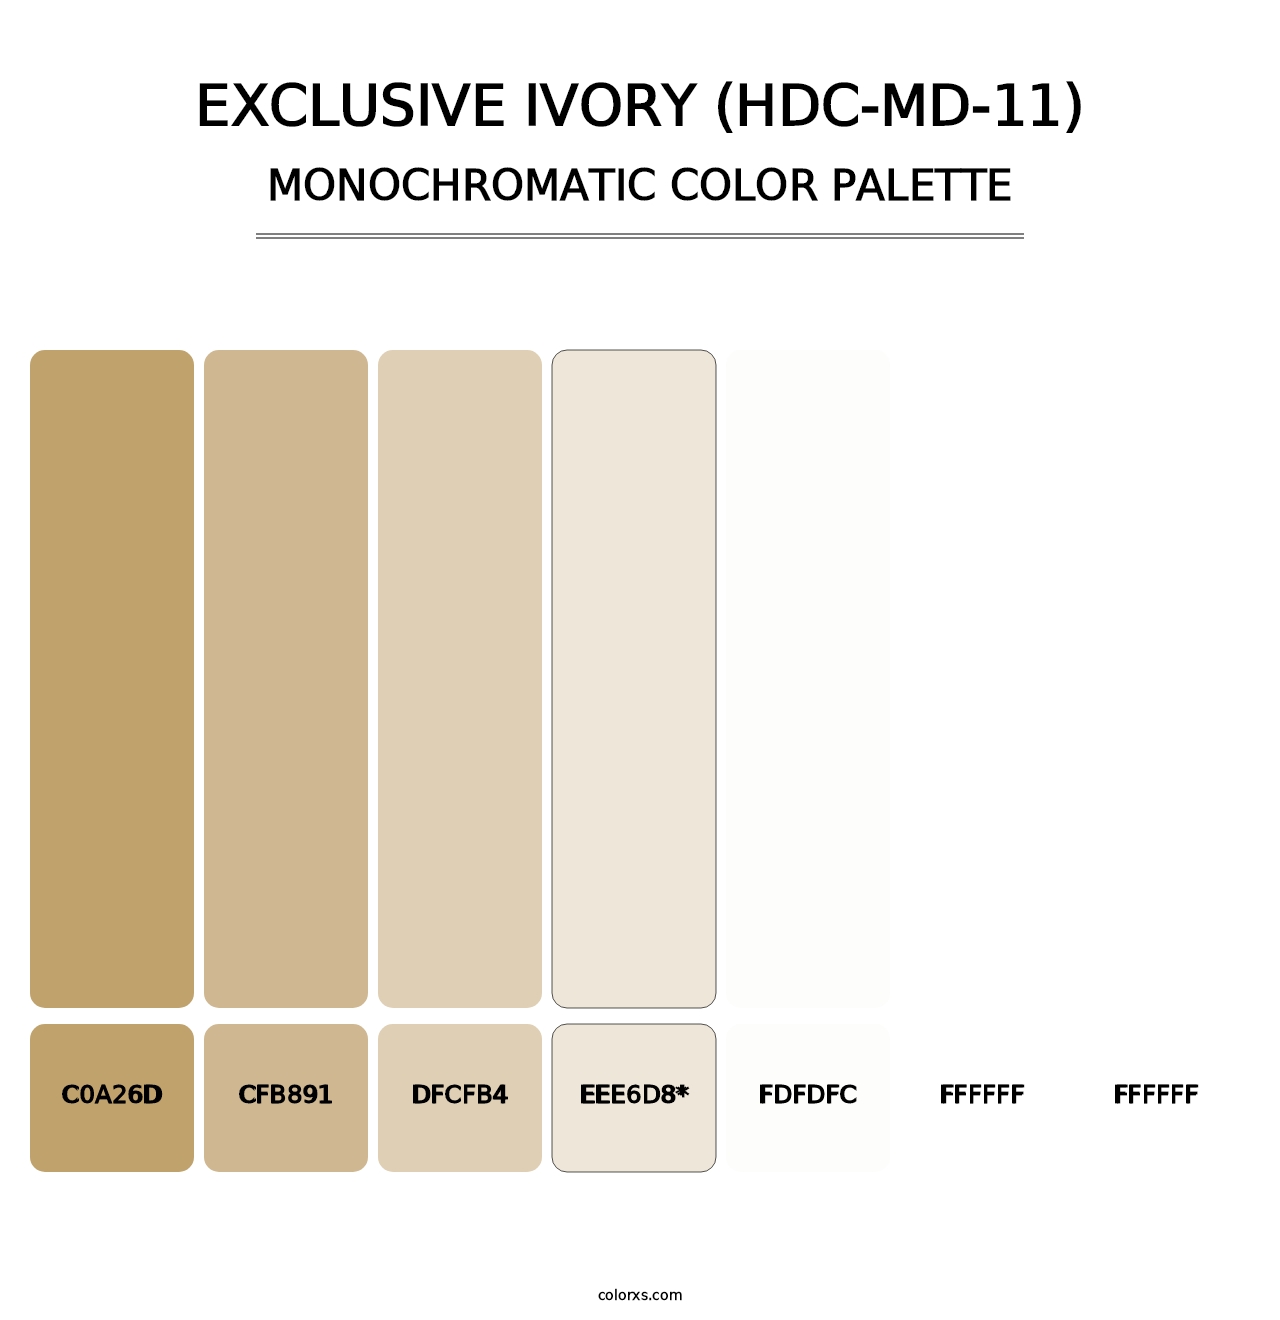 Exclusive Ivory (HDC-MD-11) - Monochromatic Color Palette